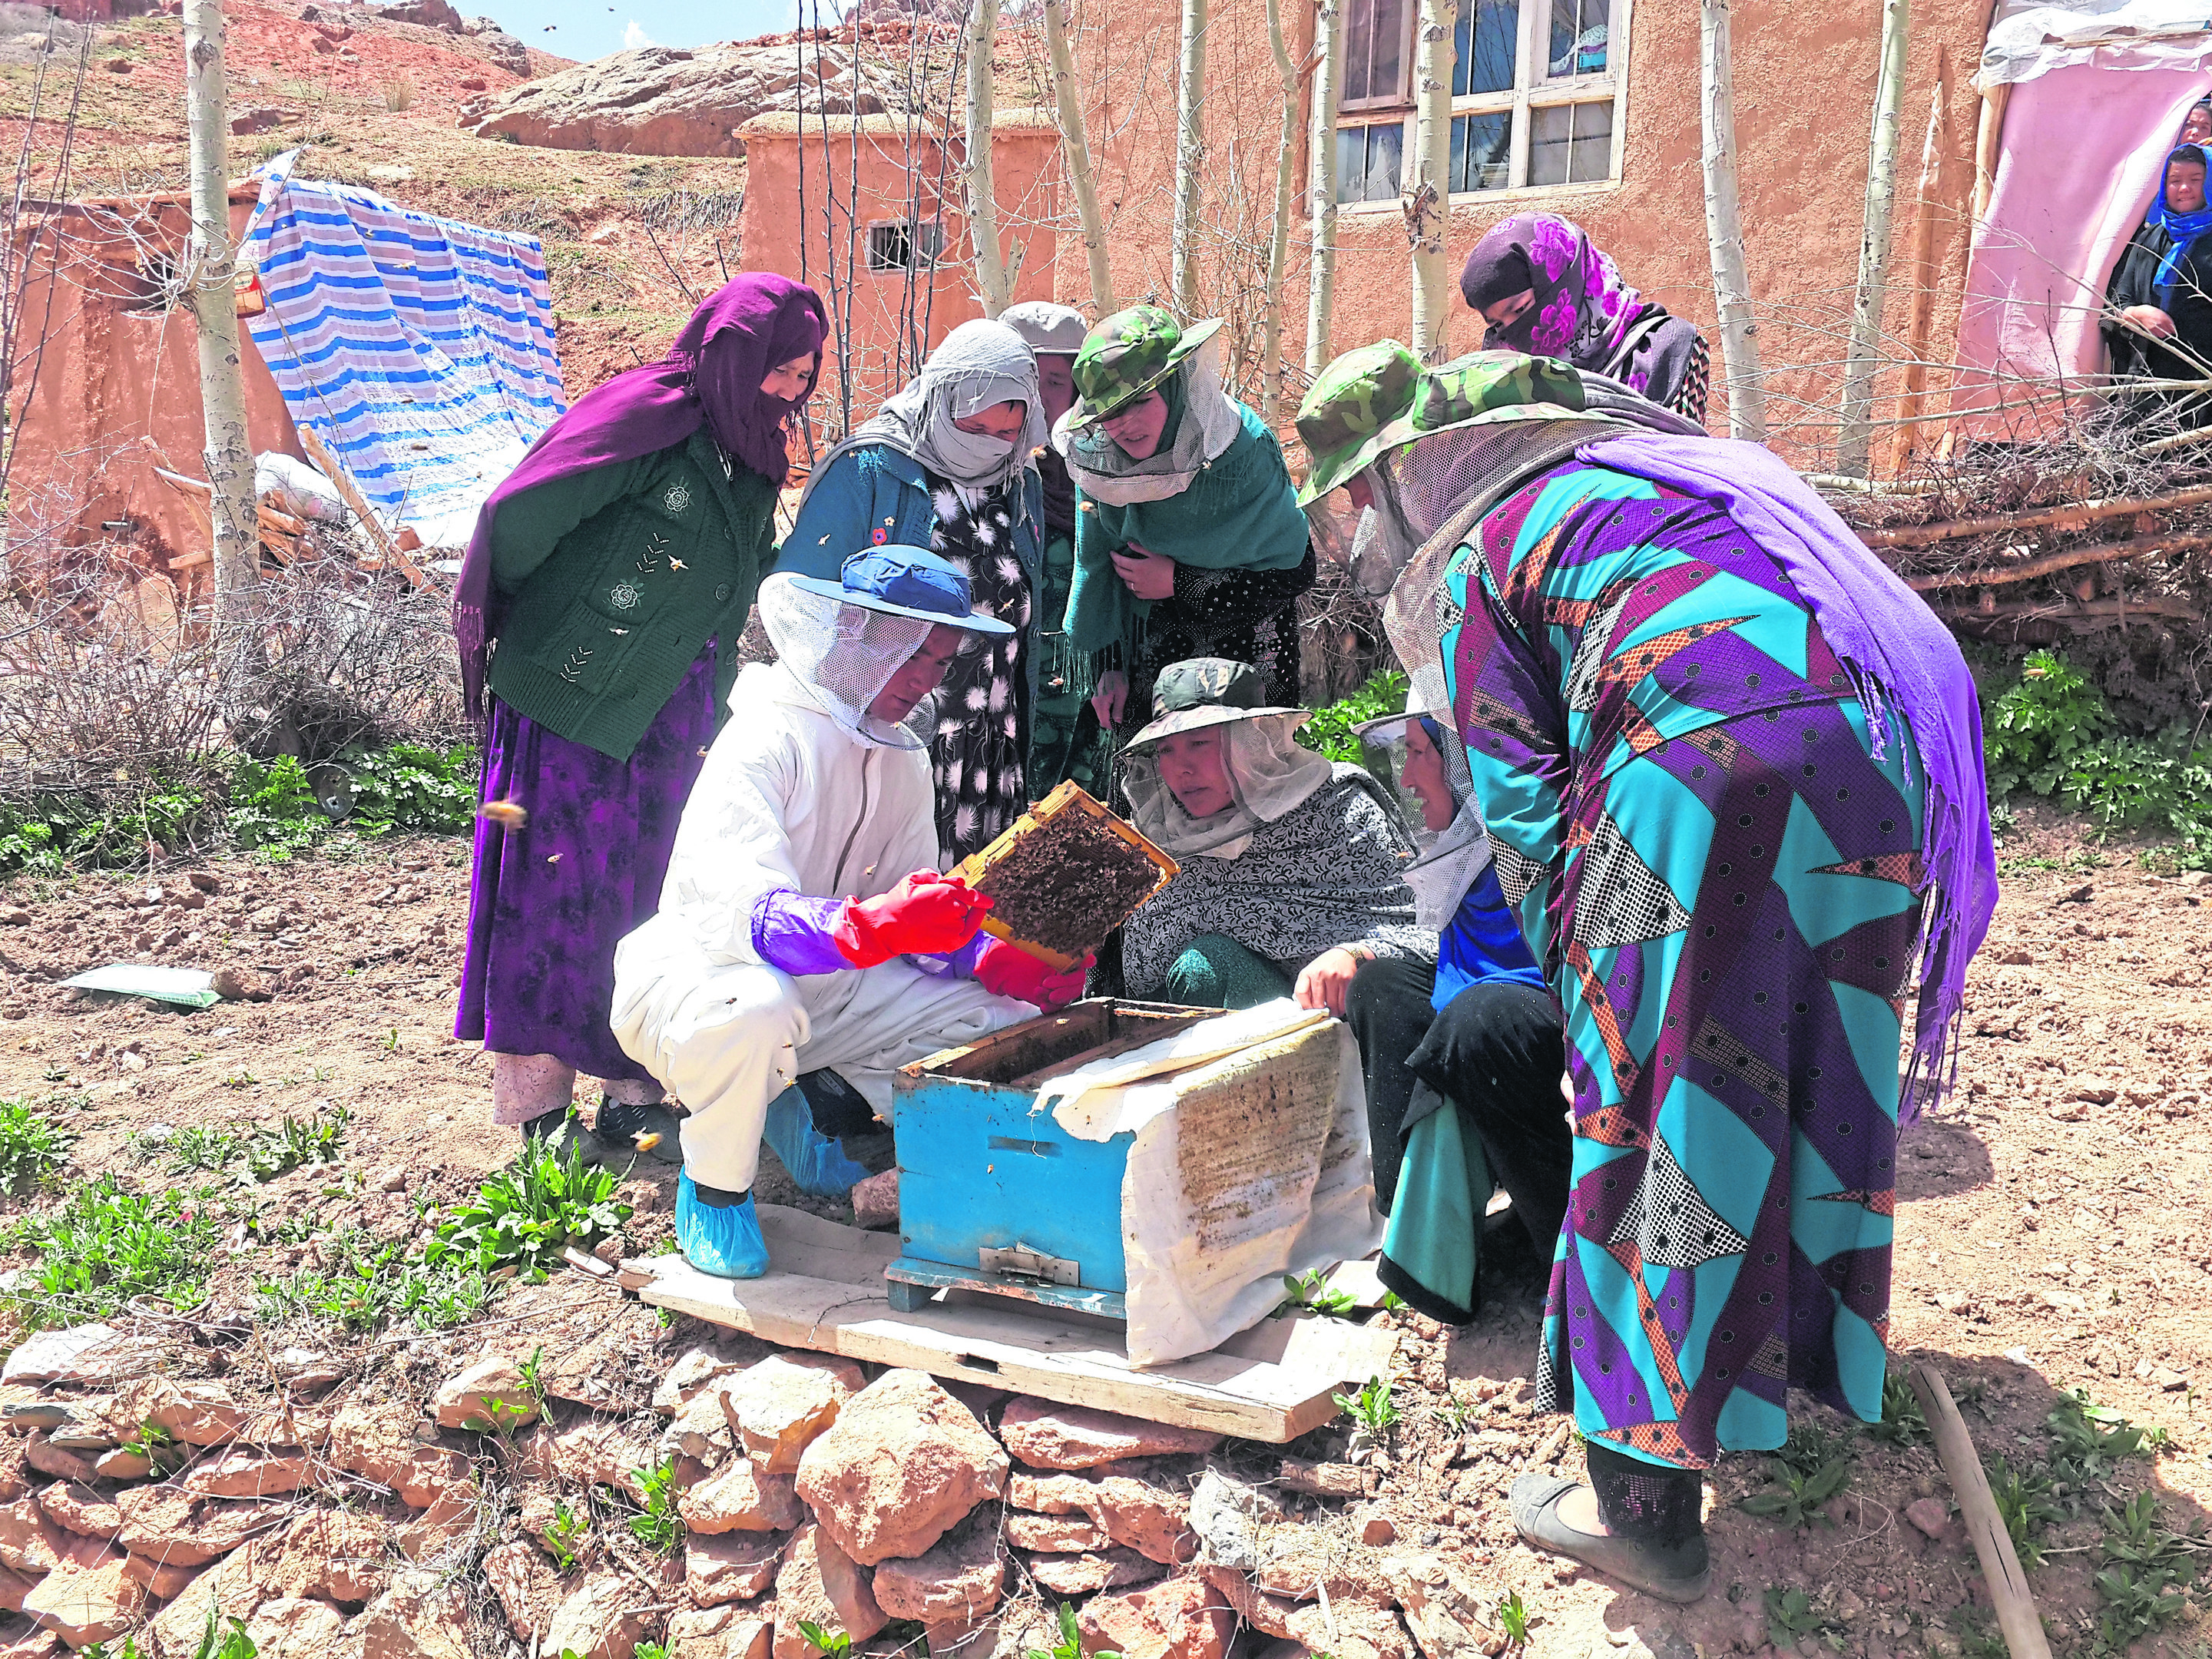 Women being trained in a beekeeping project in Afghanistan, an initiative supported by the Linda Norgrove Foundation to help women there make a living.